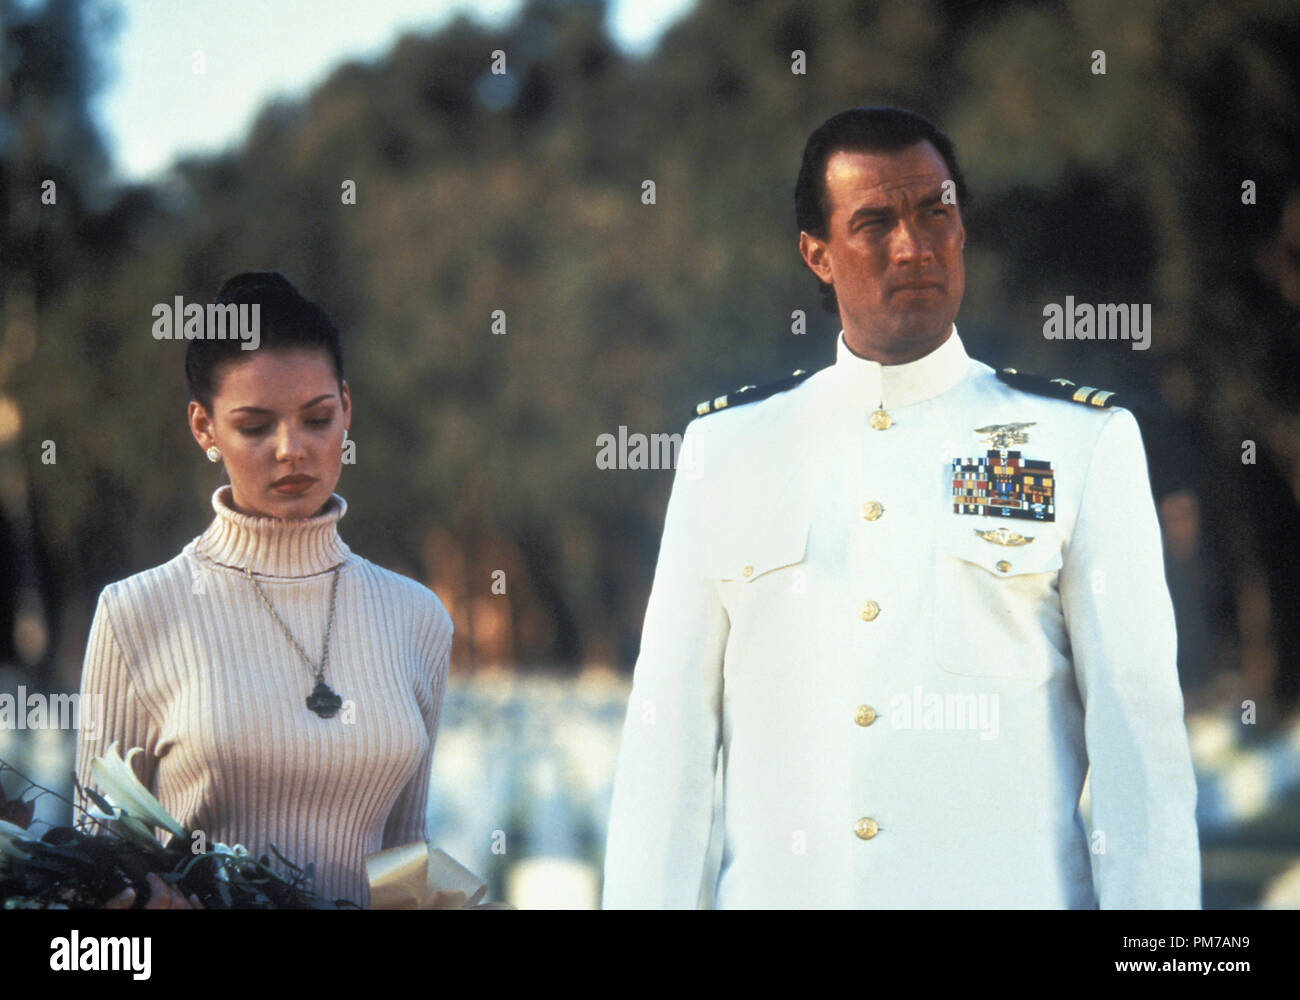 Film Still from 'Under Siege 2: Dark Territory' Katherine Heigl, Steven Seagal © 1995 Warner Brothers Photo Credit: Joel D. Warren   File Reference # 31043020THA  For Editorial Use Only - All Rights Reserved Stock Photo